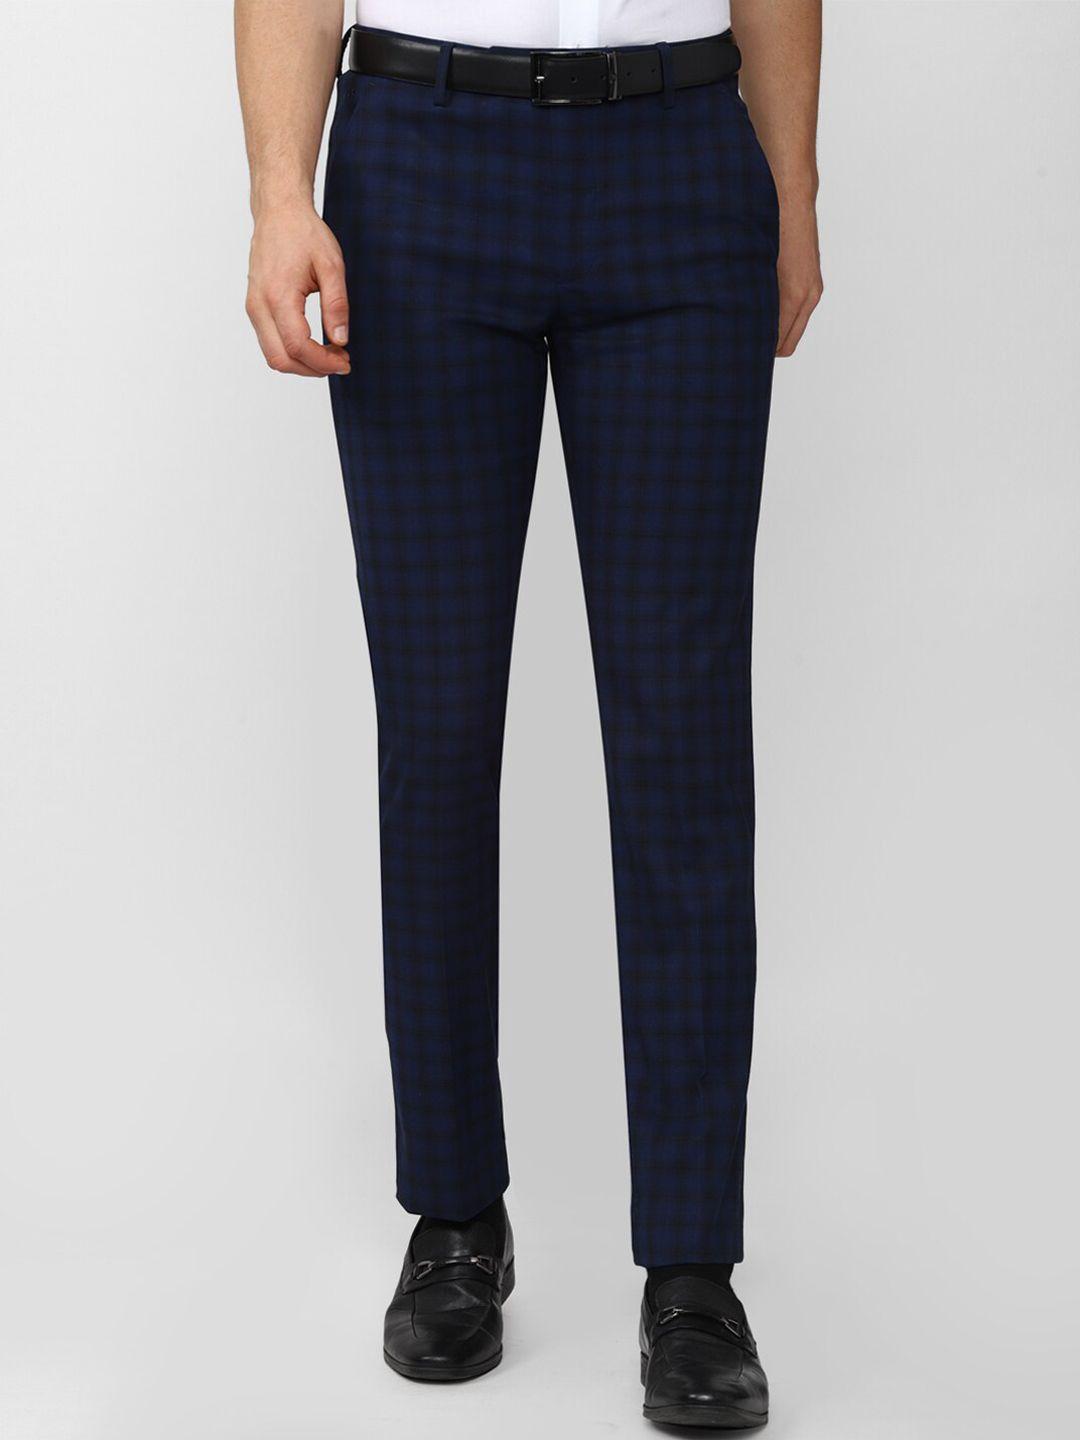 peter england men navy blue checked slim fit trousers